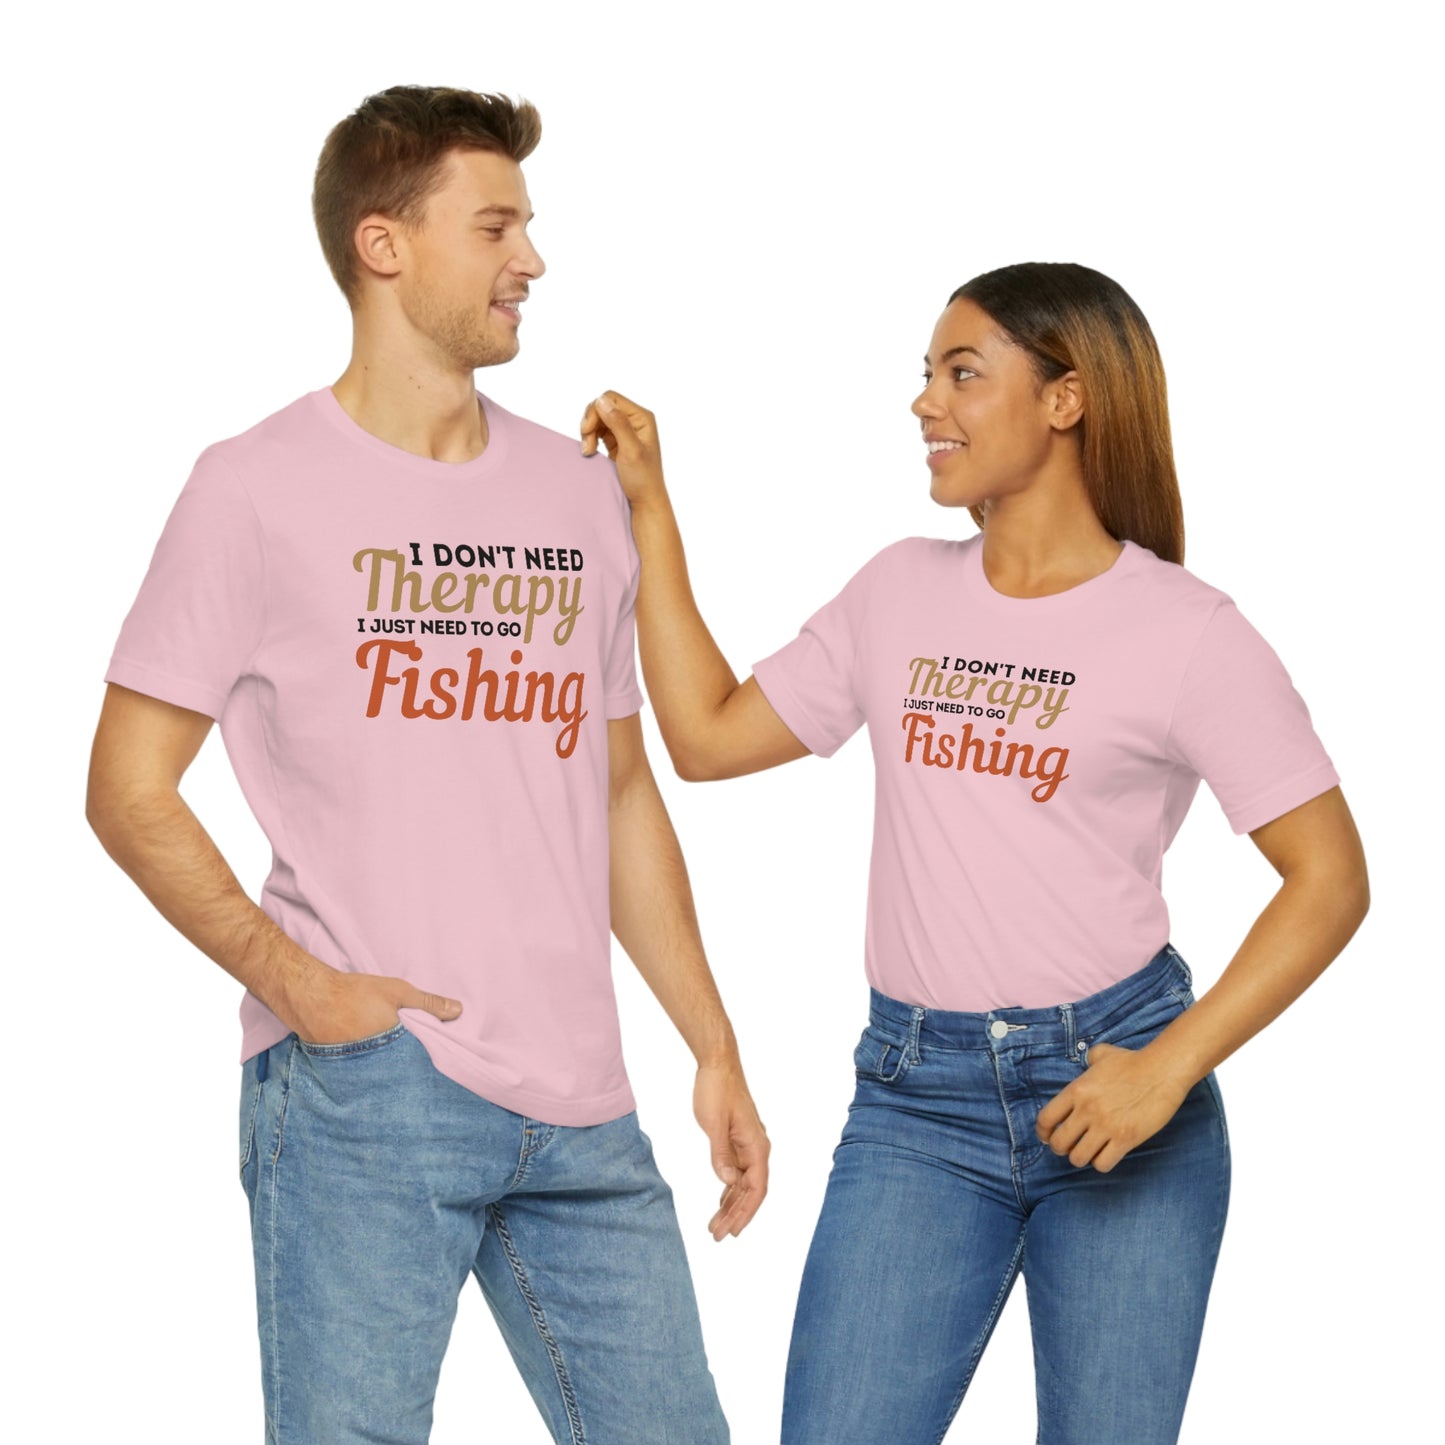 I don't need therapy I just need to go Fishing, fishing shirt, dad shirt, dad gift, gift for outdoor lover, fishing gift nature lover shirt